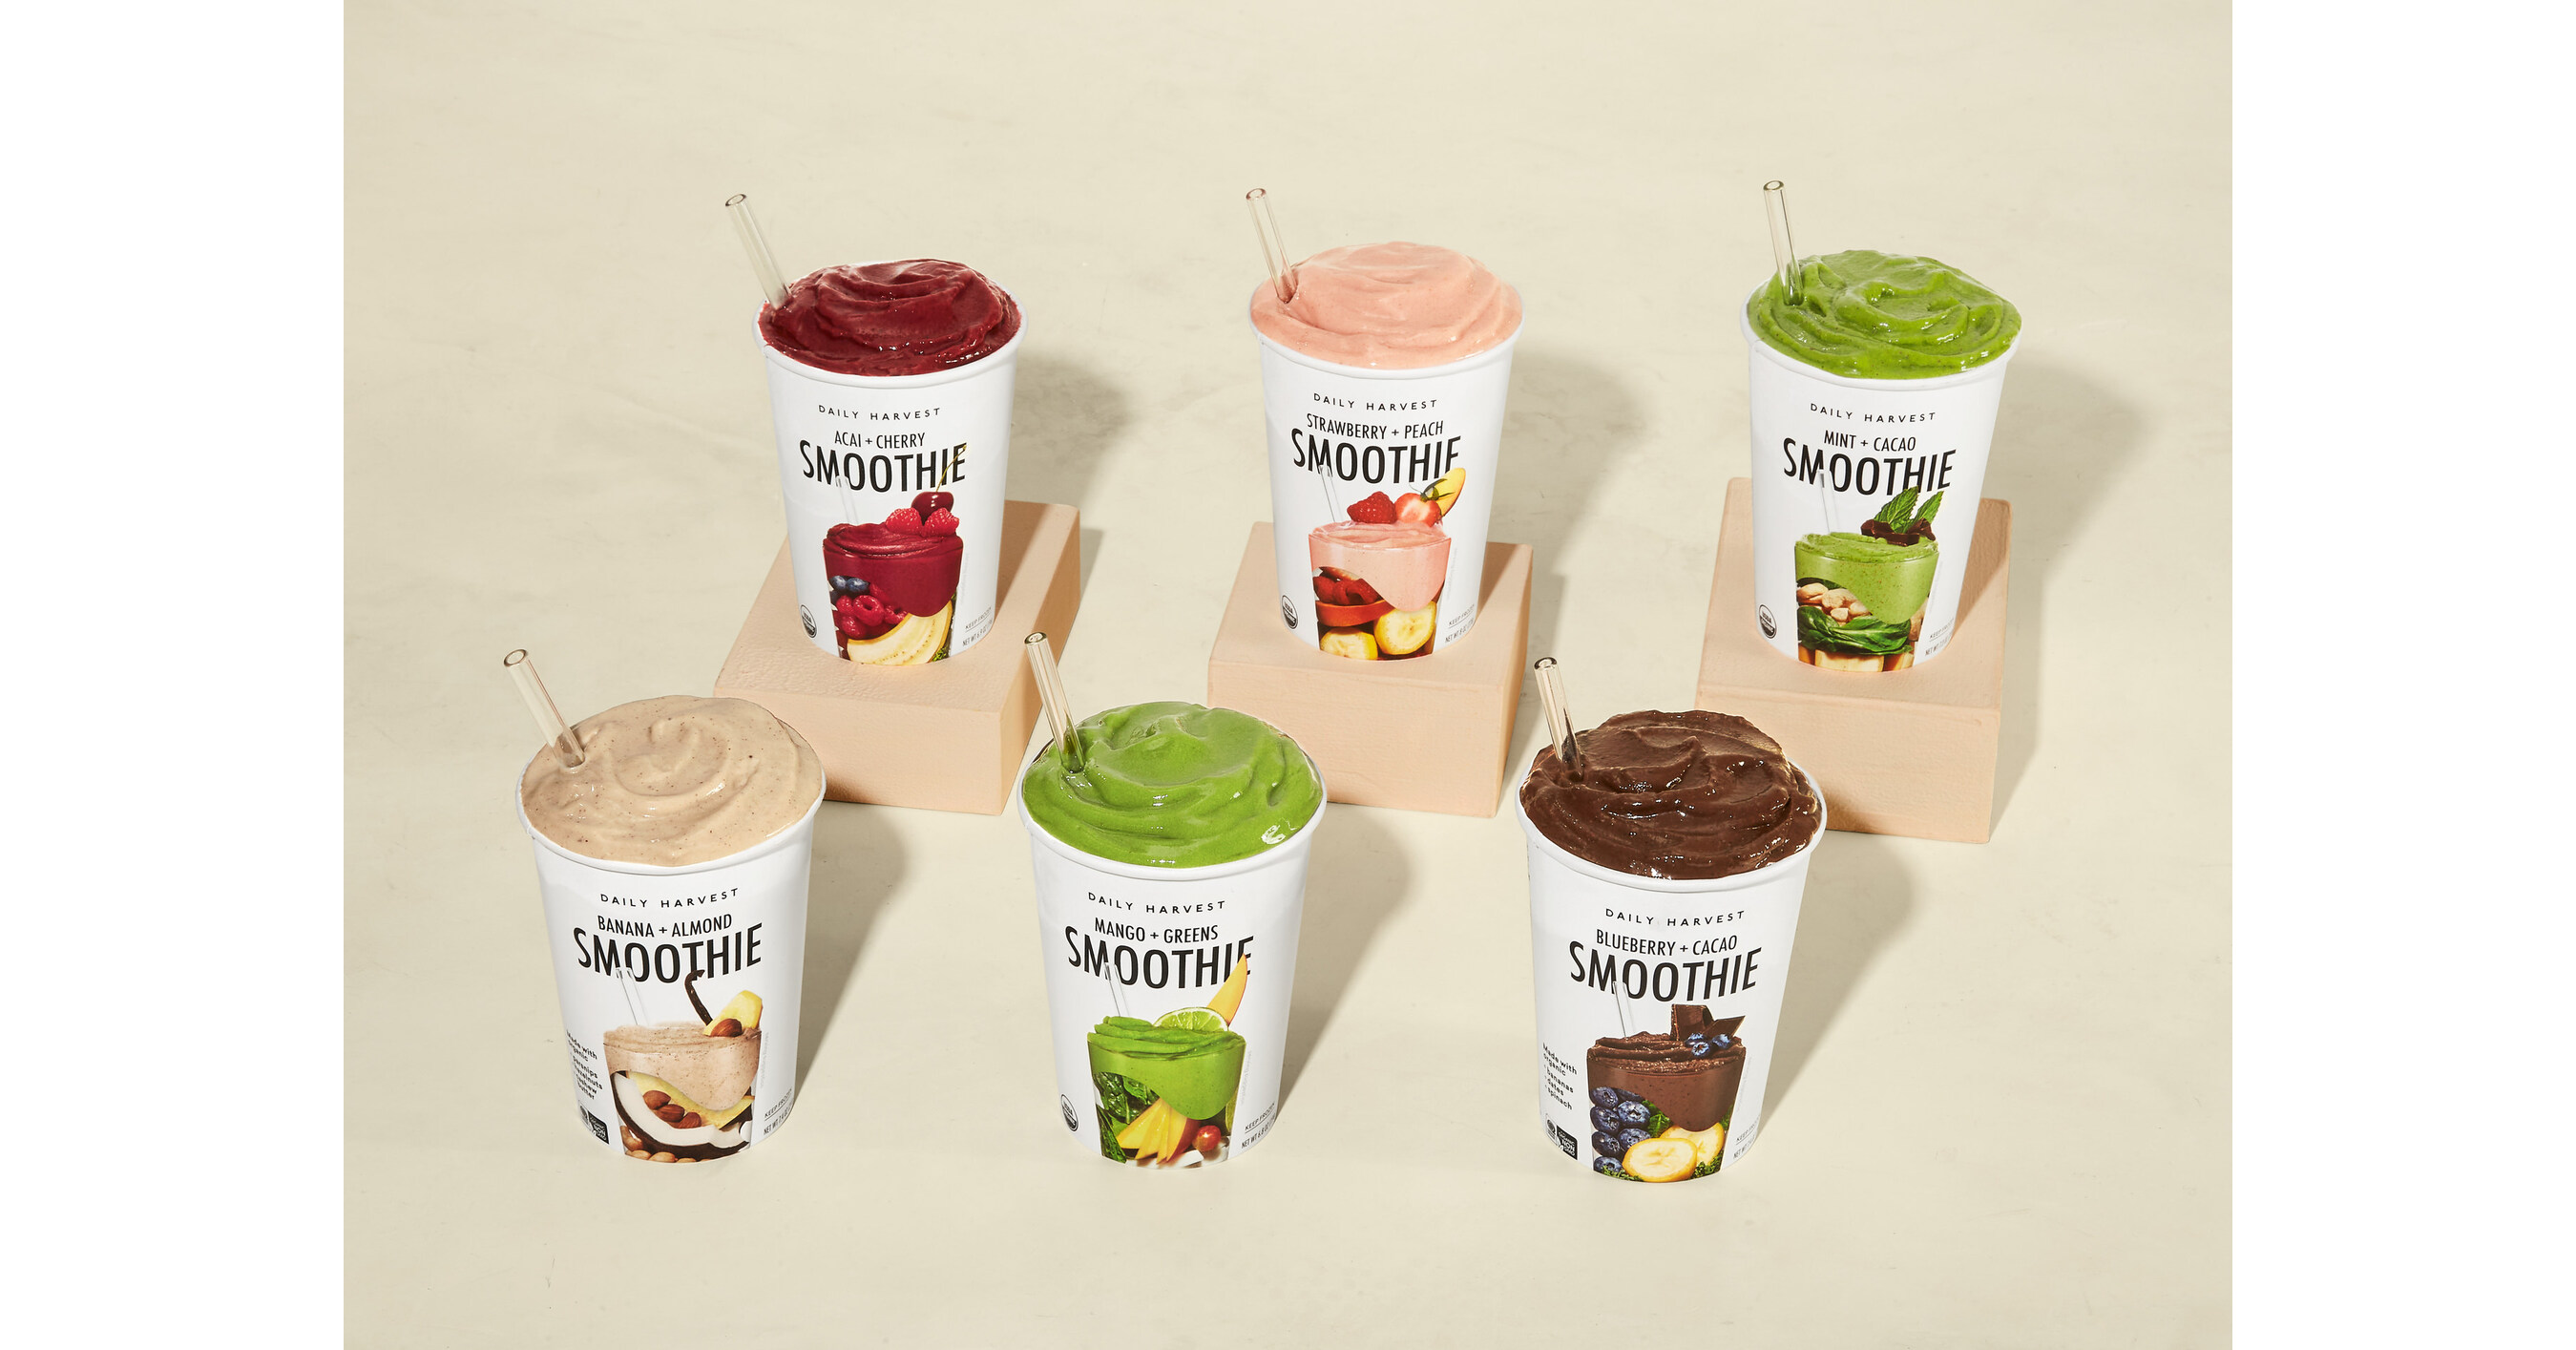 Daily Harvest's Best-Selling Smoothies, Harvest Bowls and Soft Drinks Are Coming to Target